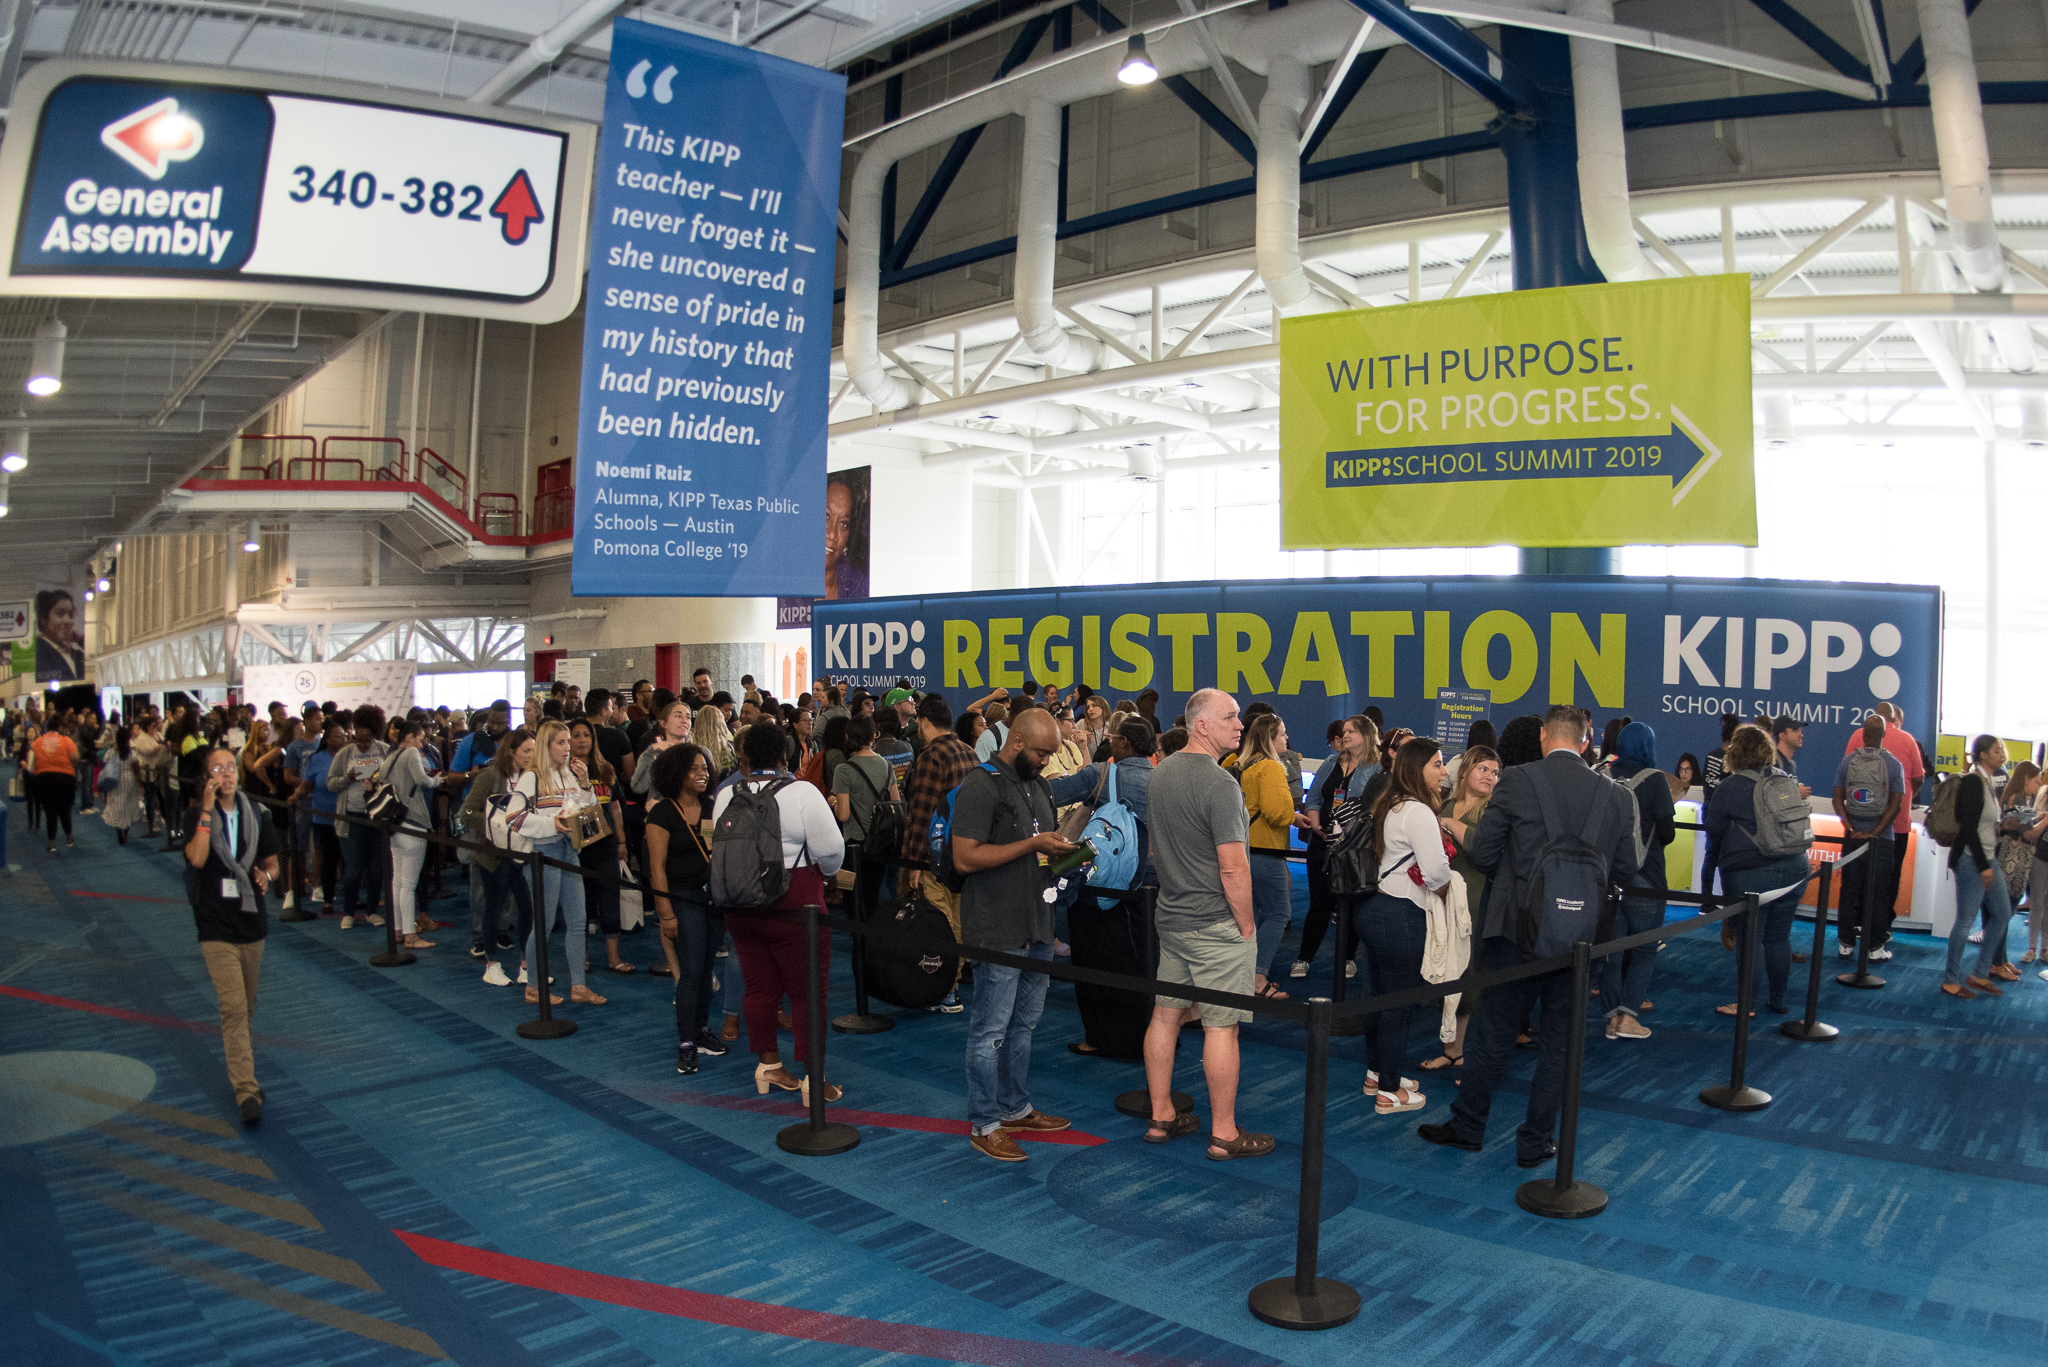 Photo shows long lines of people to register for the 2019 KIPP School Summit